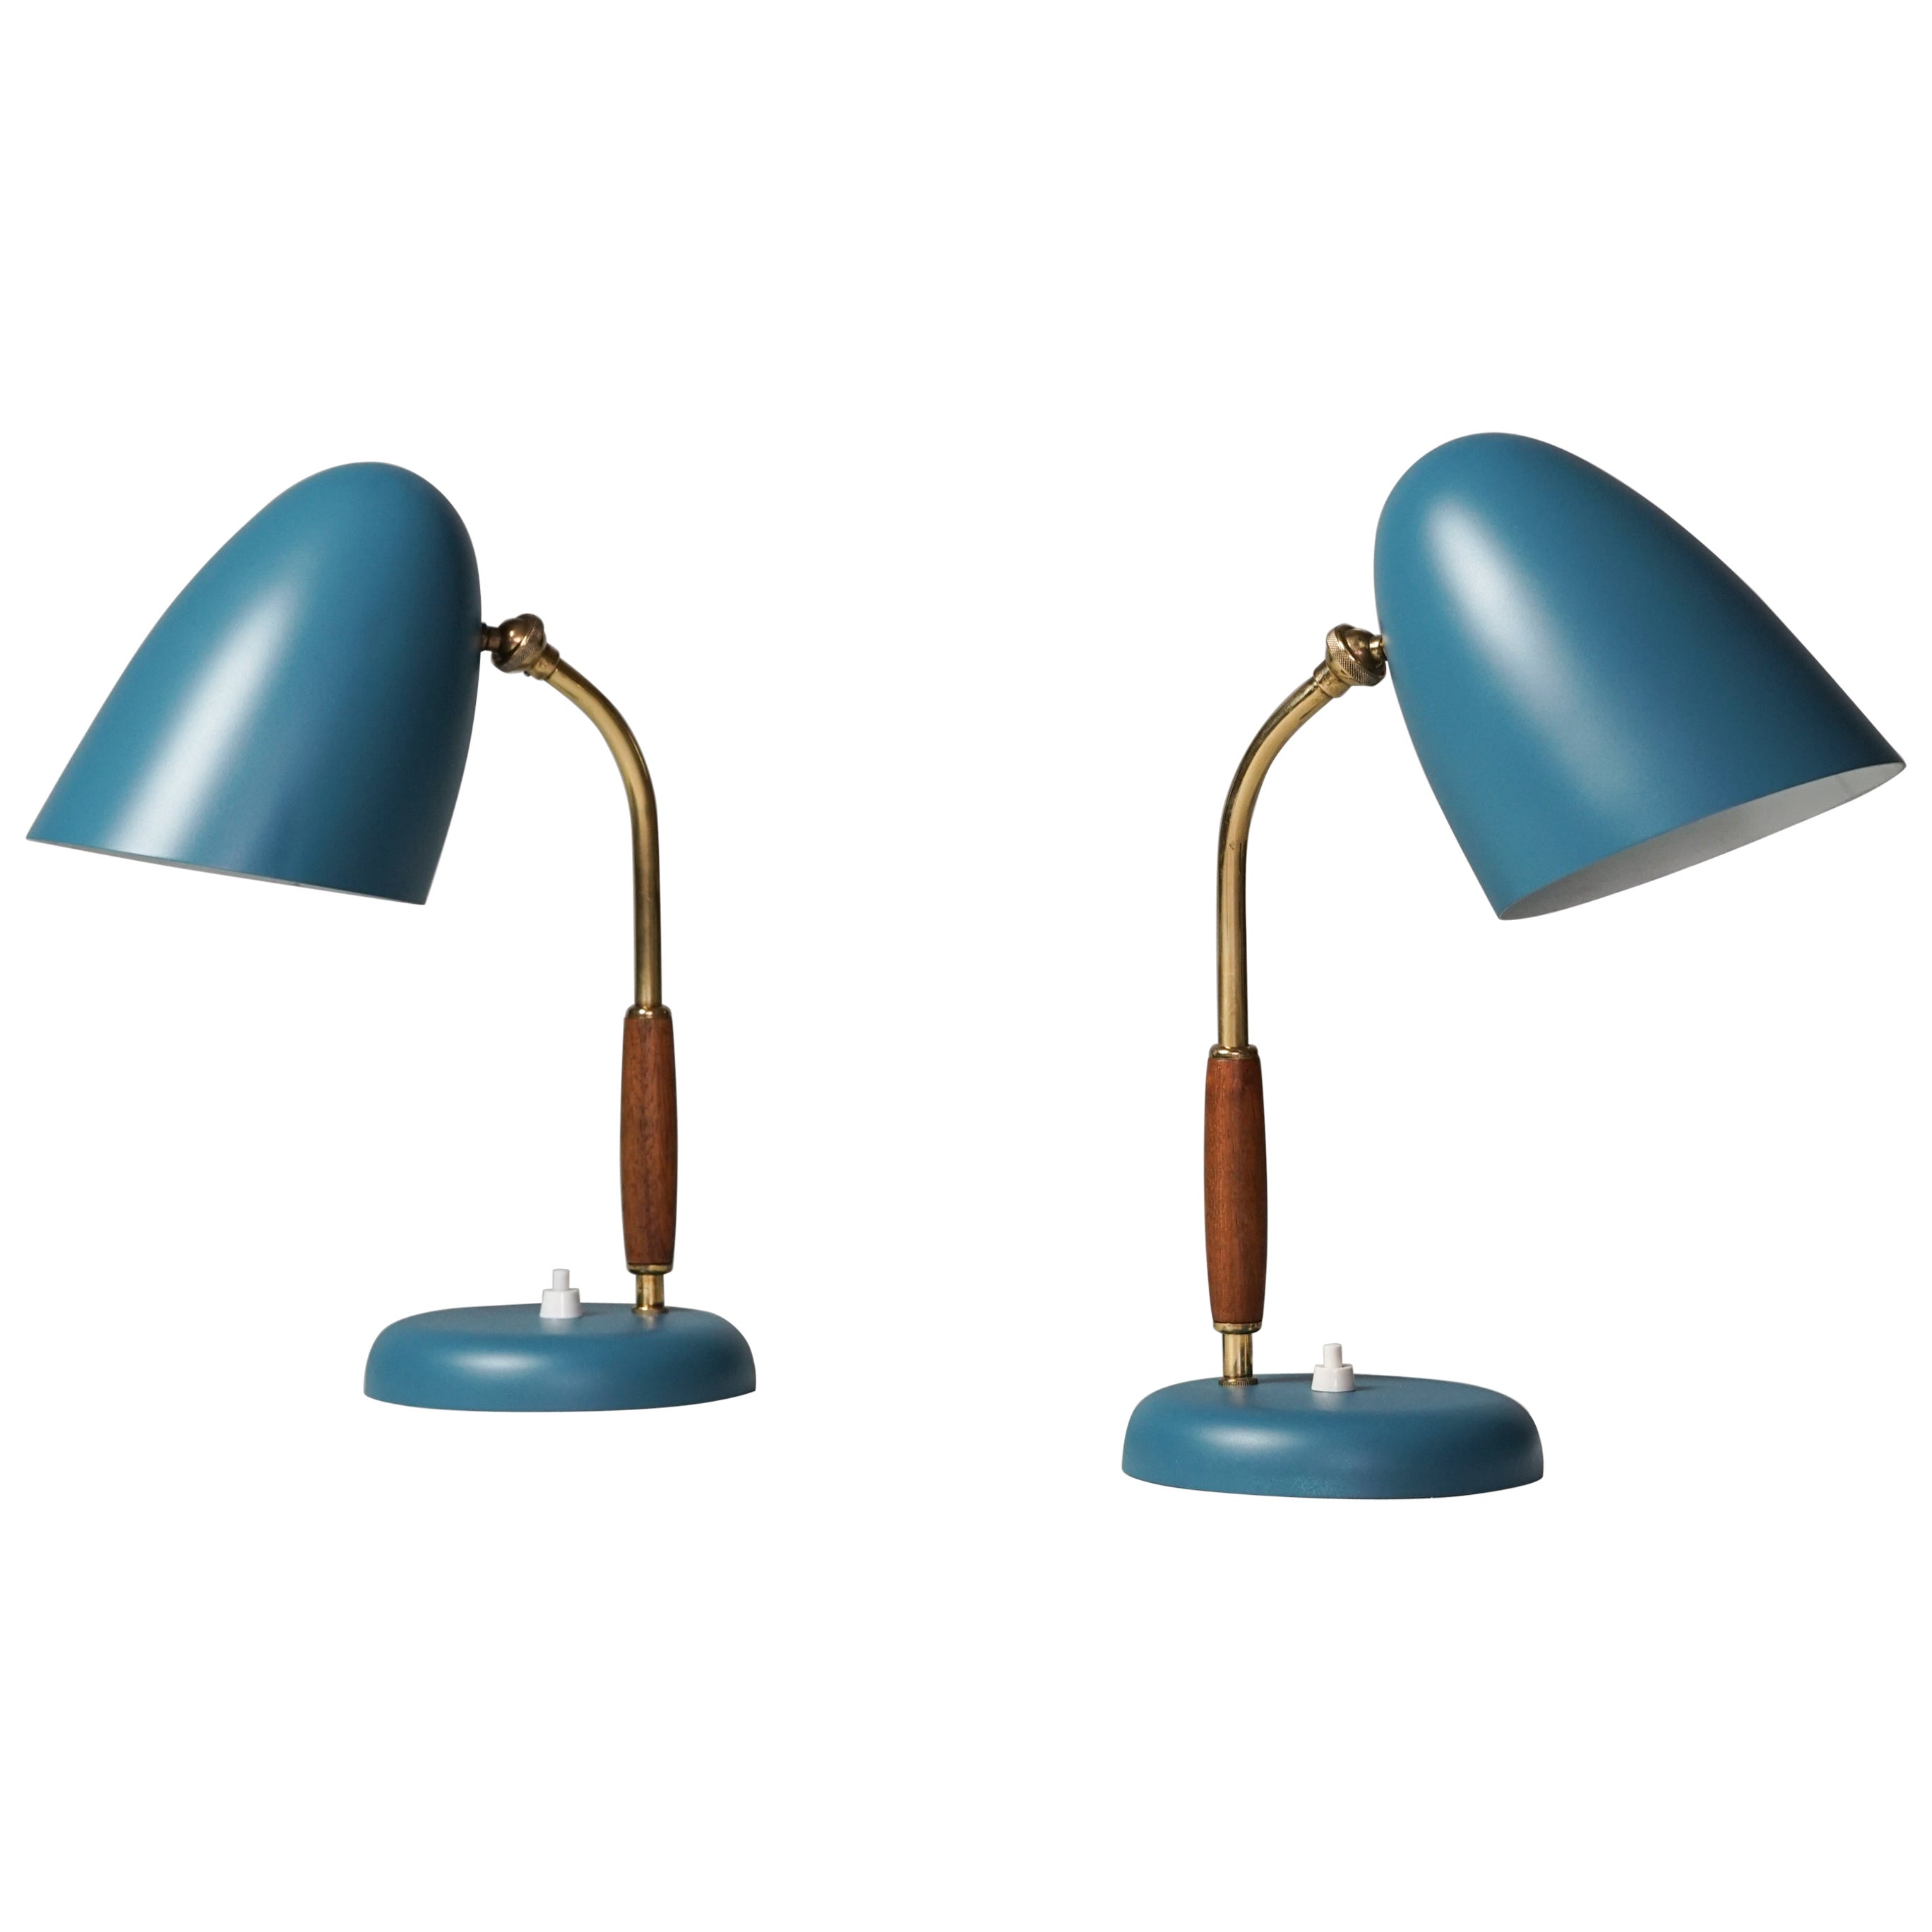 Pair of Table Lamps, Attributed to Lisa Johansson-Pape, Oy Stockmann AB, 1950s